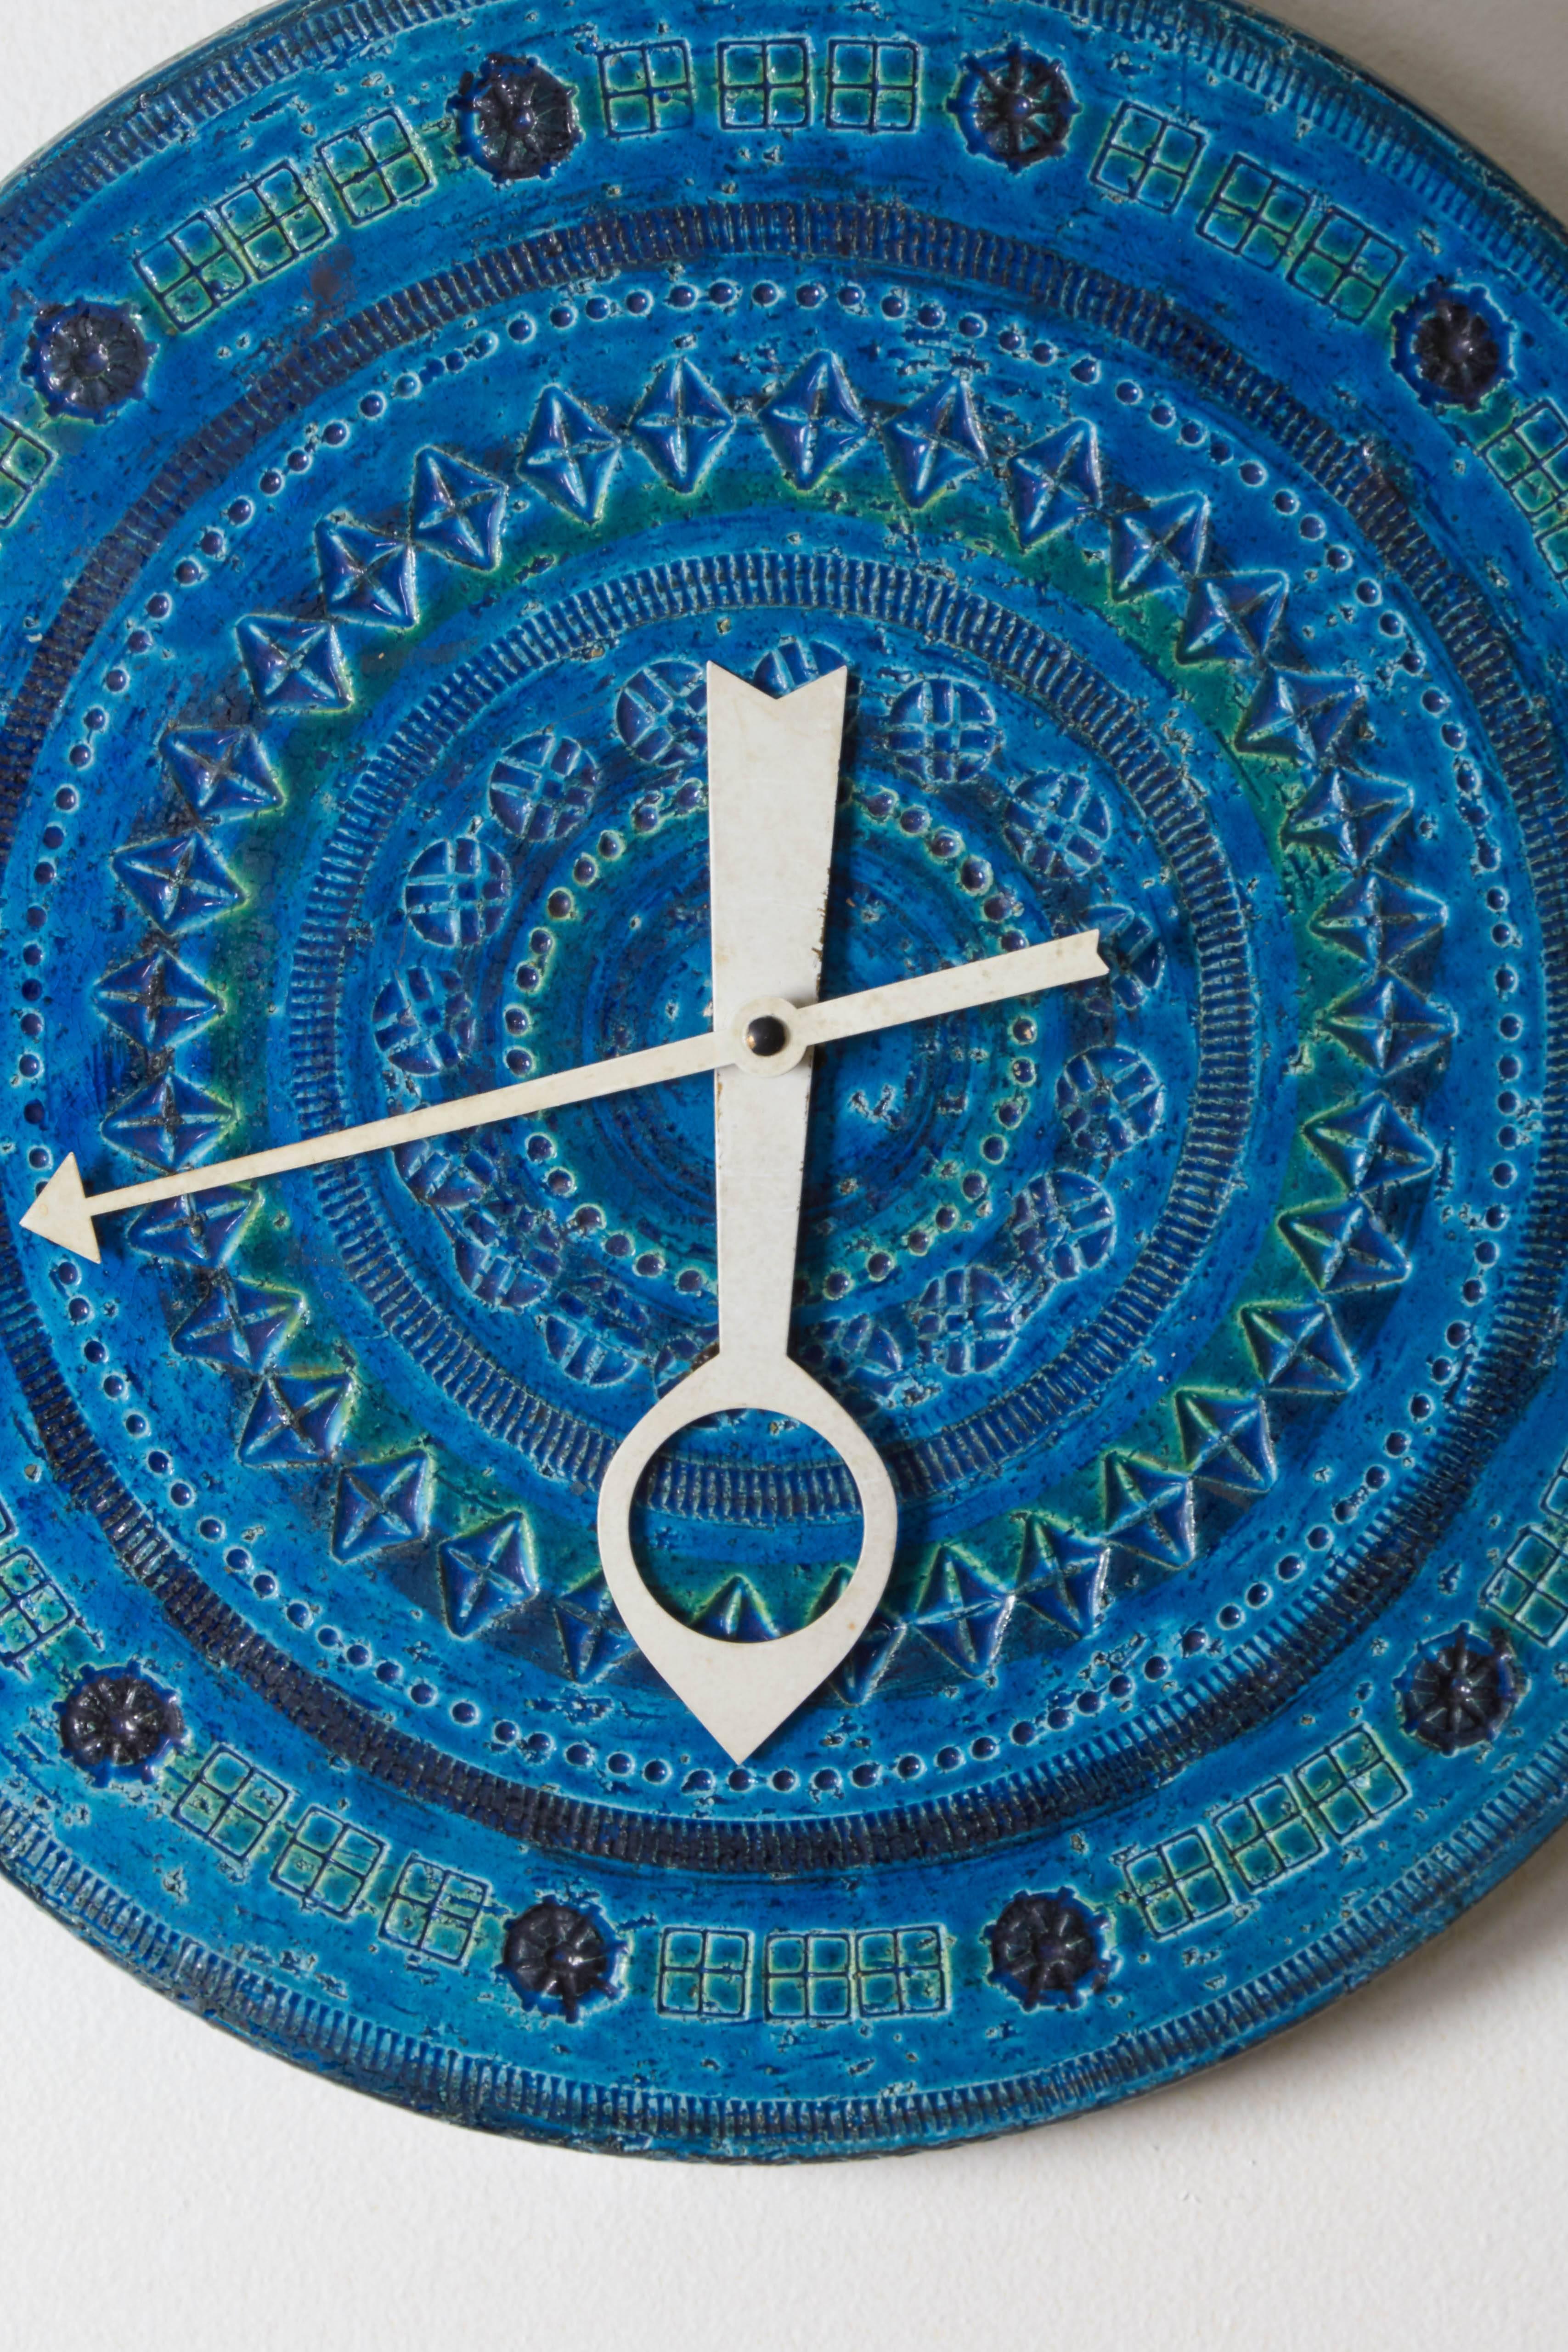 A ceramic wall clock by Bitossi, produced in Italy, circa 1960s for Meridian Clocks, imported by Raymor, the face intricately incised and glazed in Rimini Blu, with metal hour and minute hands. This clock is in very good vintage condition,